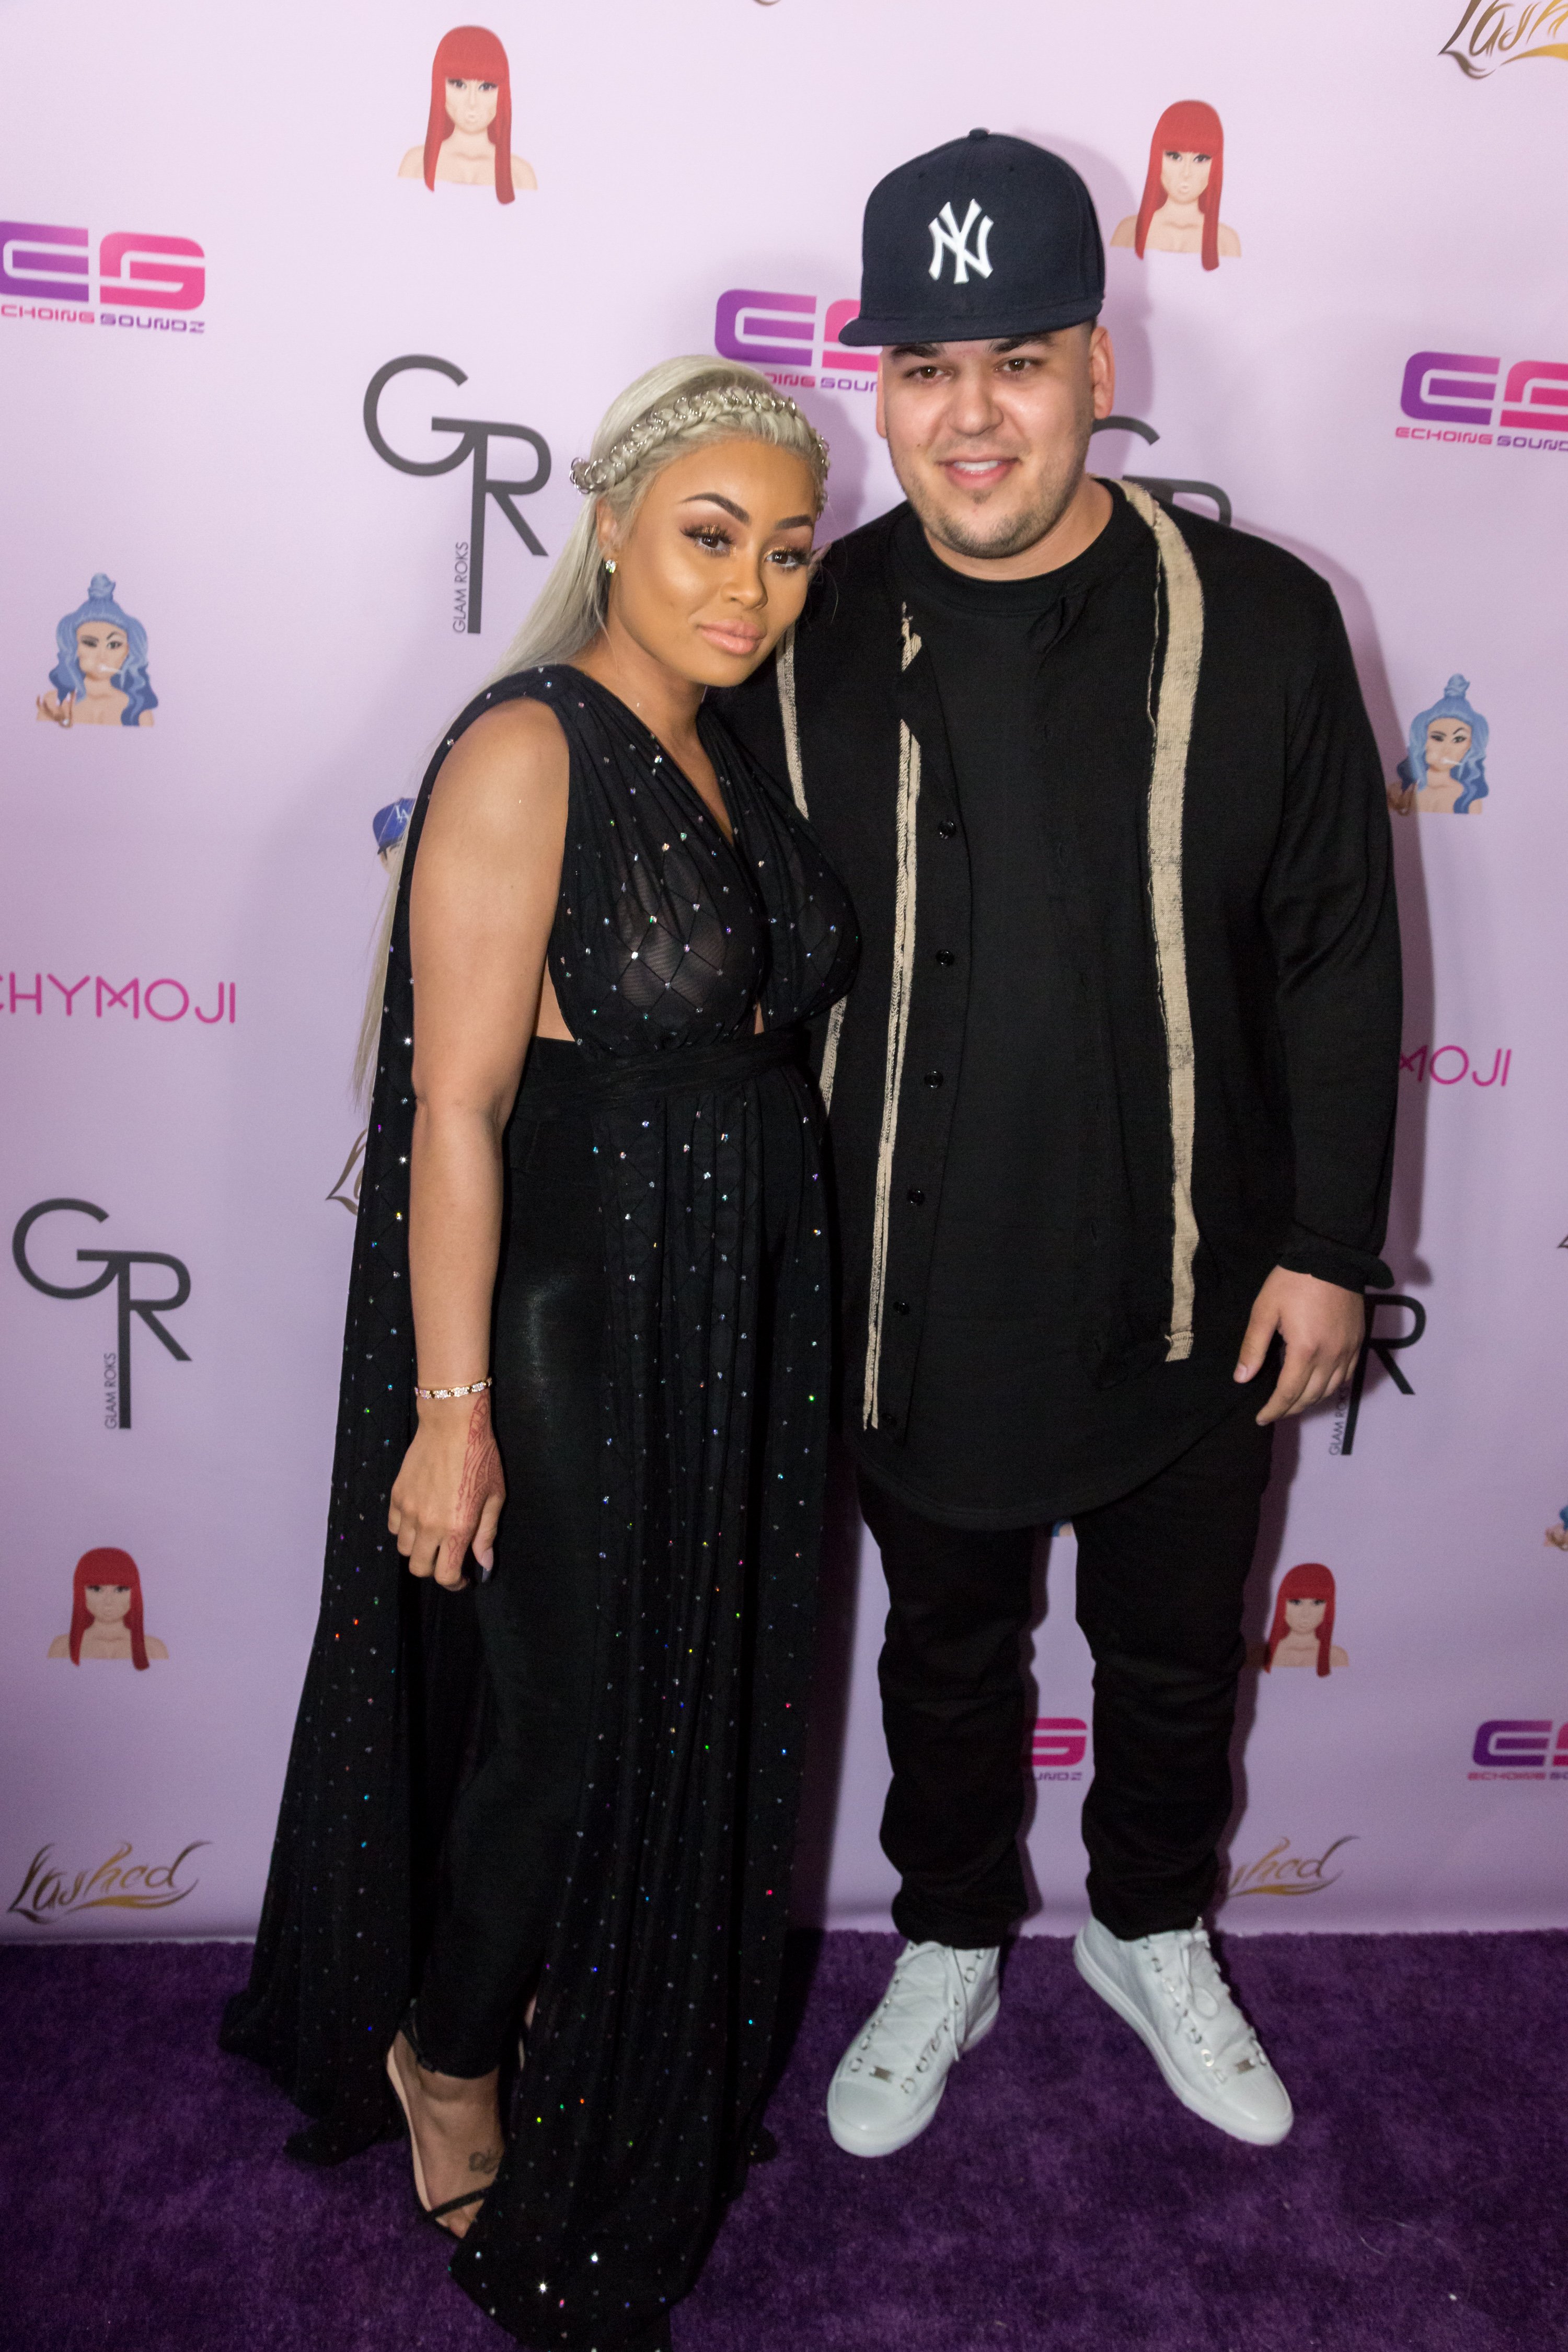 Blac Chyna and Rob Kardashian attend Blac Chyna's birthday celebration at Hard Rock Cafe on May 10, 2016 in Hollywood, California | Photo: Getty Images